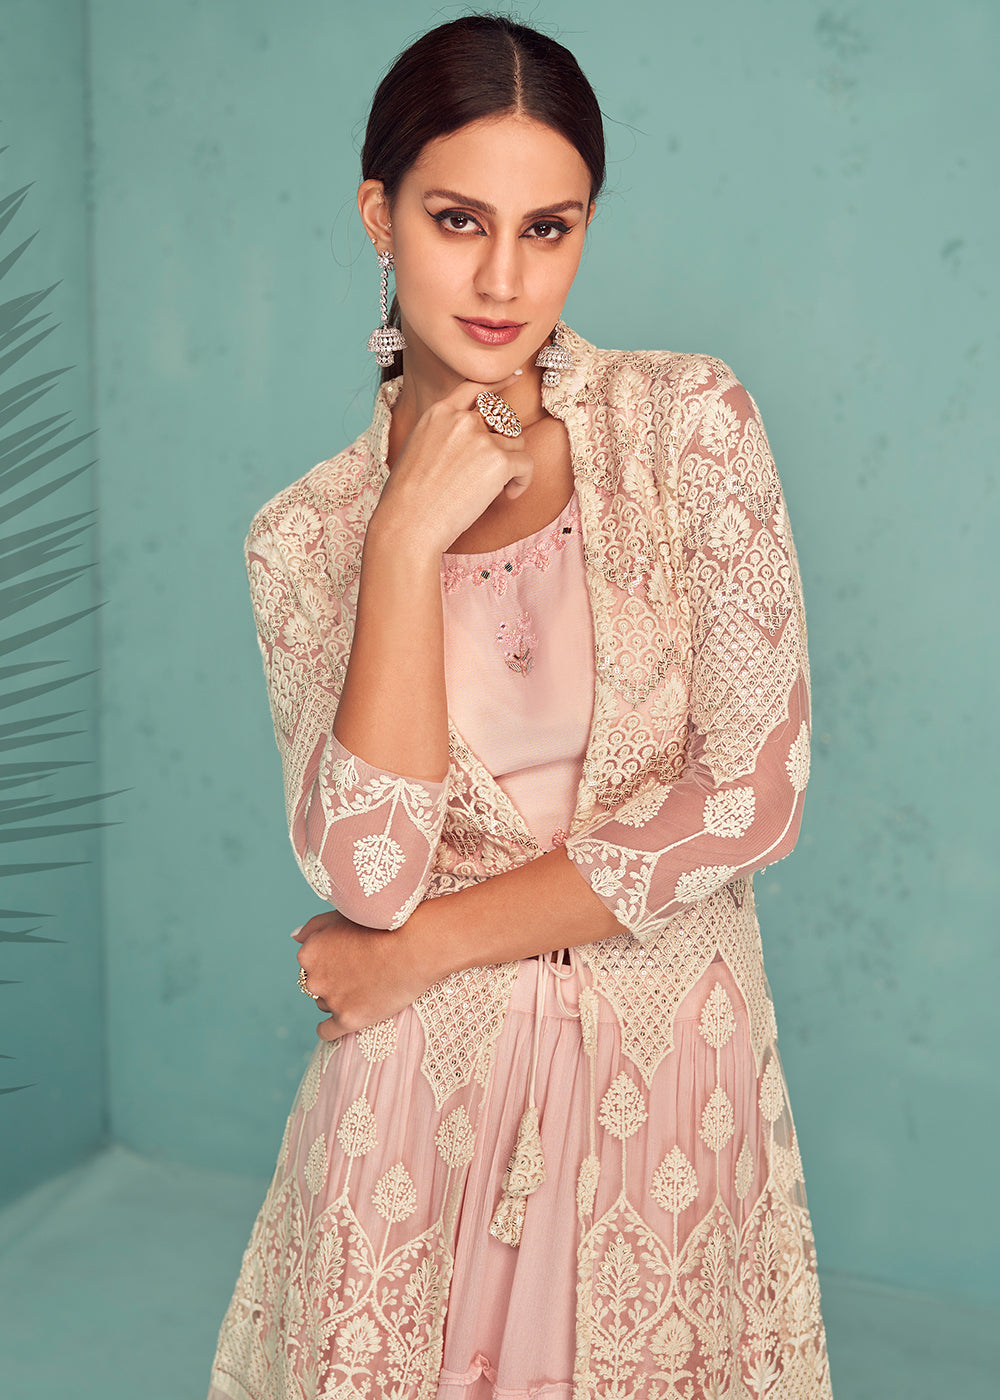 Shop Now Soft Peach Indo-Western Jacket Style Georgette Skirt Dress Online in USA, UK, Canada & Worldwide at Empress Clothing.